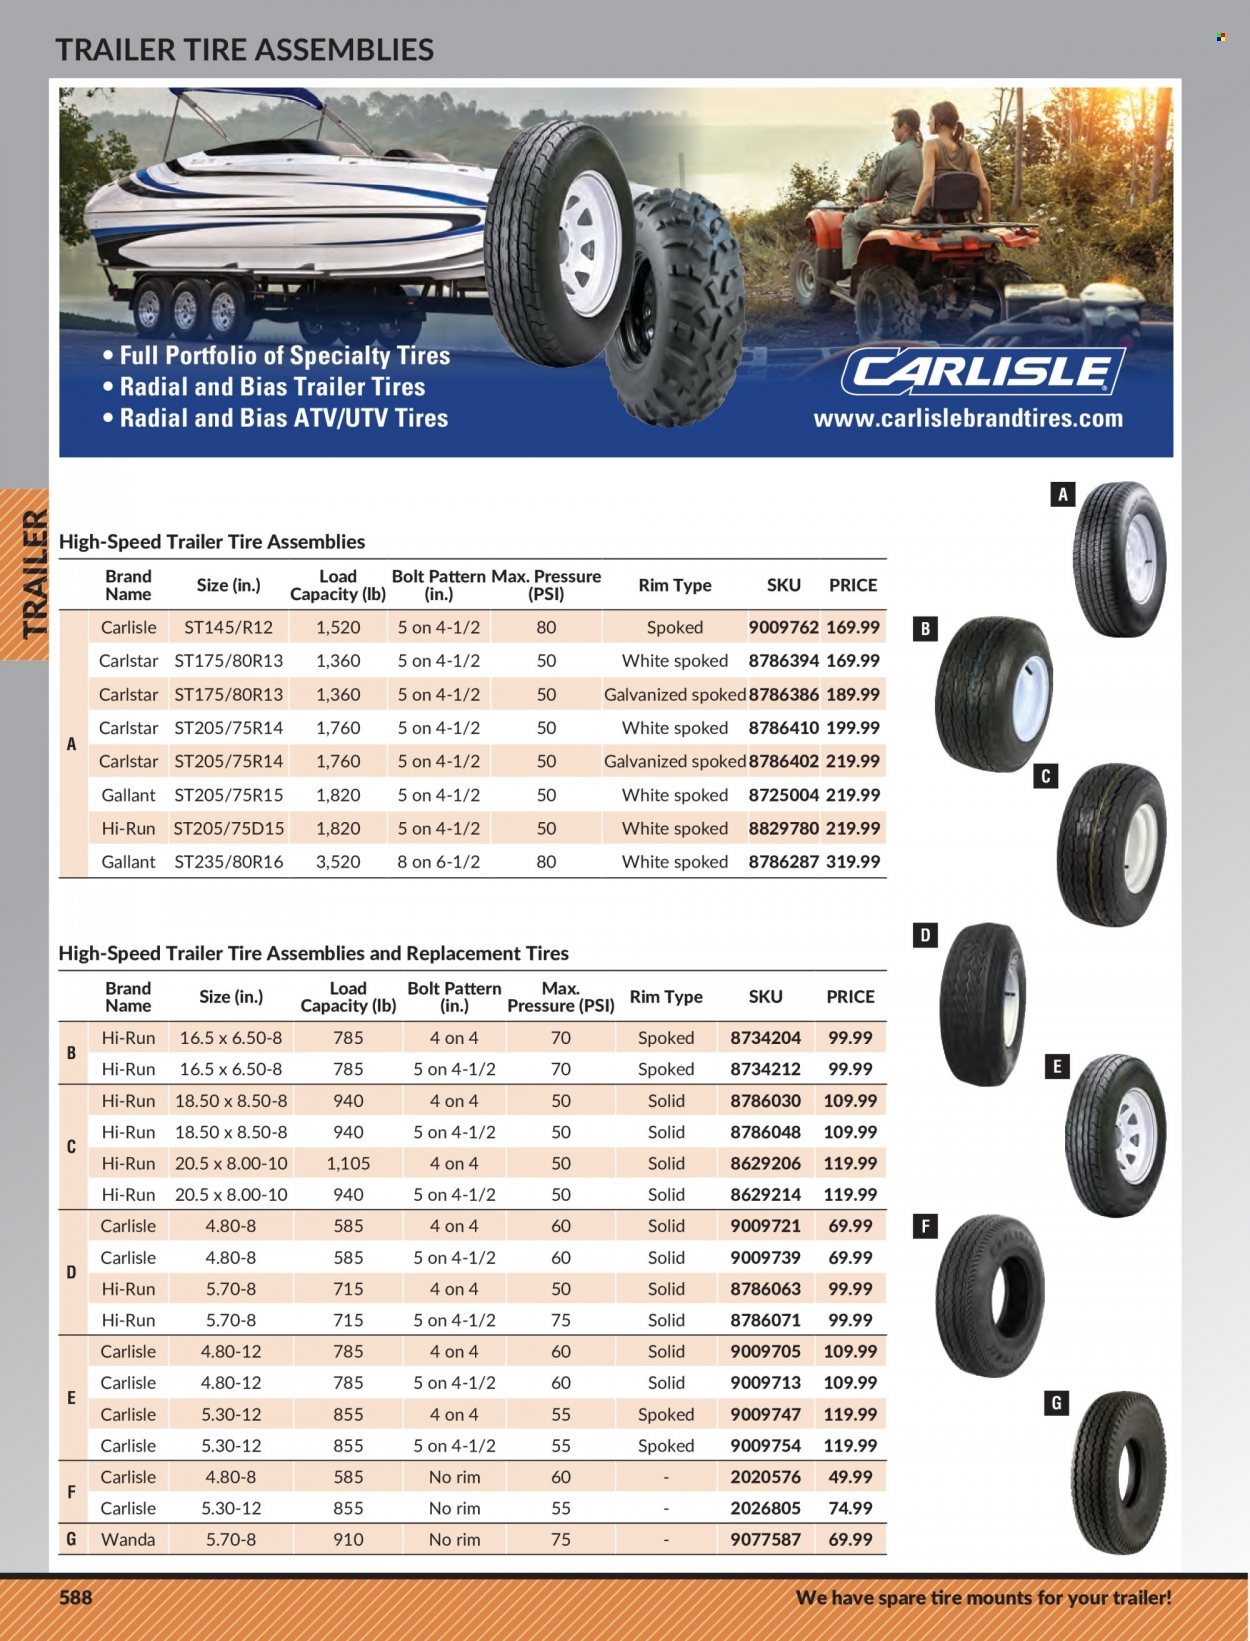 Princess Auto Flyer - Sales products - trailer, tires. Page 598.